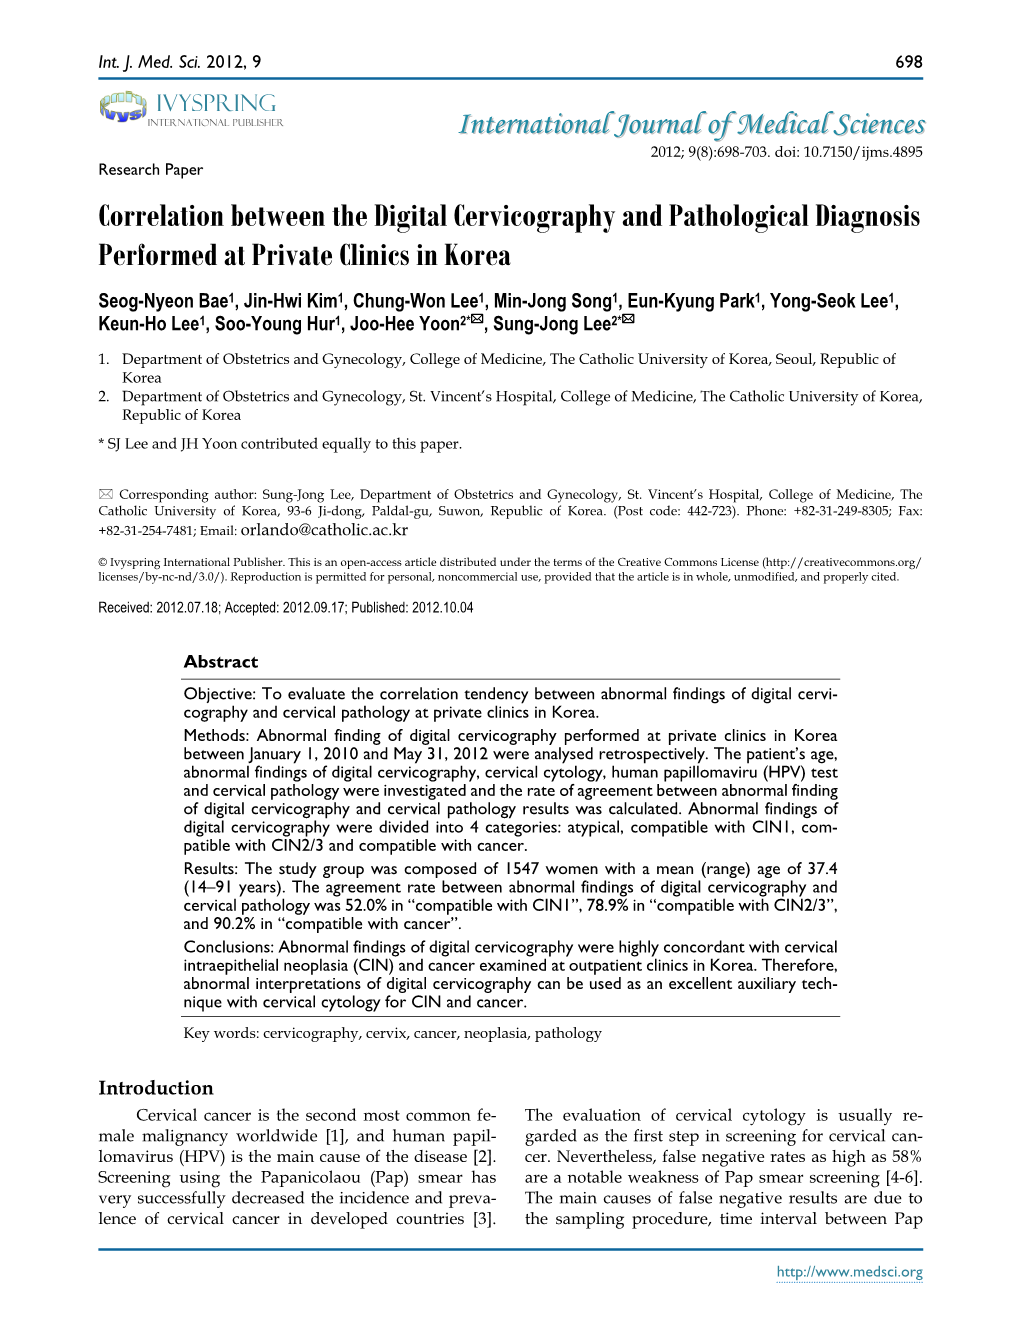 Correlation Between the Digital Cervicography and Pathological Diagnosis Performed at Private Clinics in Korea